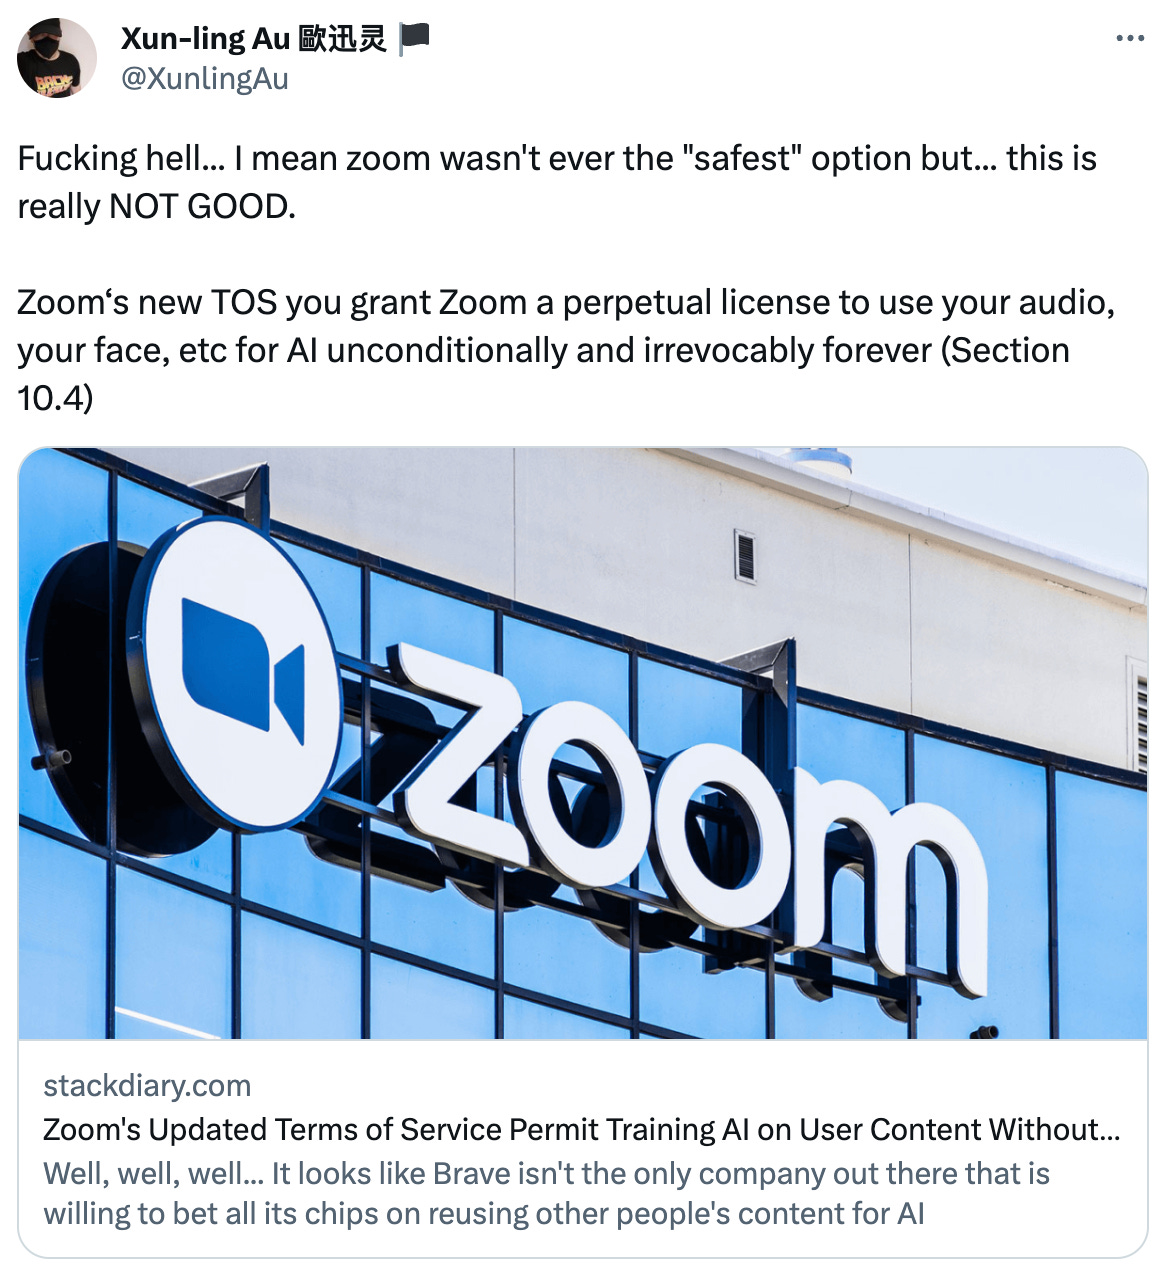  See new Tweets Conversation Xun-ling Au 歐迅灵 🏴 @XunlingAu Fucking hell... I mean zoom wasn't ever the "safest" option but... this is really NOT GOOD.   Zoom‘s new TOS you grant Zoom a perpetual license to use your audio, your face, etc for AI unconditionally and irrevocably forever (Section 10.4) stackdiary.com Zoom's Updated Terms of Service Permit Training AI on User Content Without Opt-Out Well, well, well... It looks like Brave isn't the only company out there that is willing to bet all its chips on reusing other people's content for AI